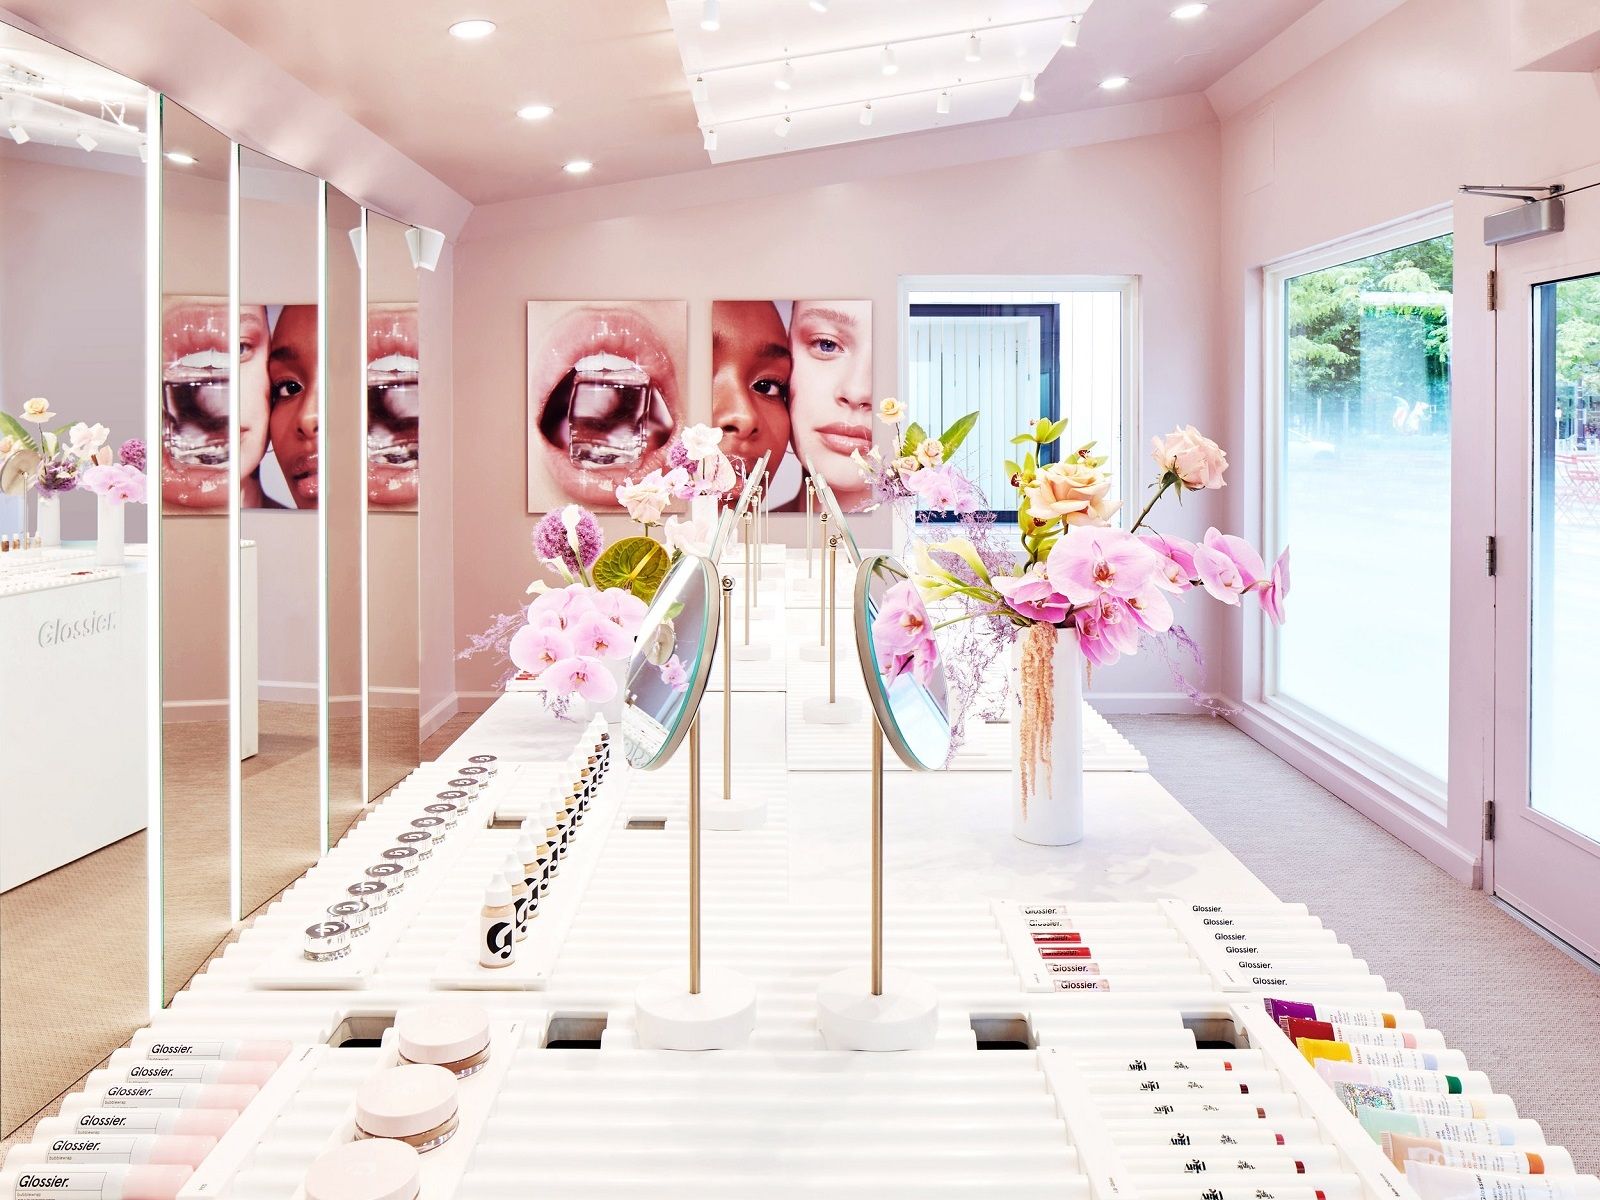 glossier stores